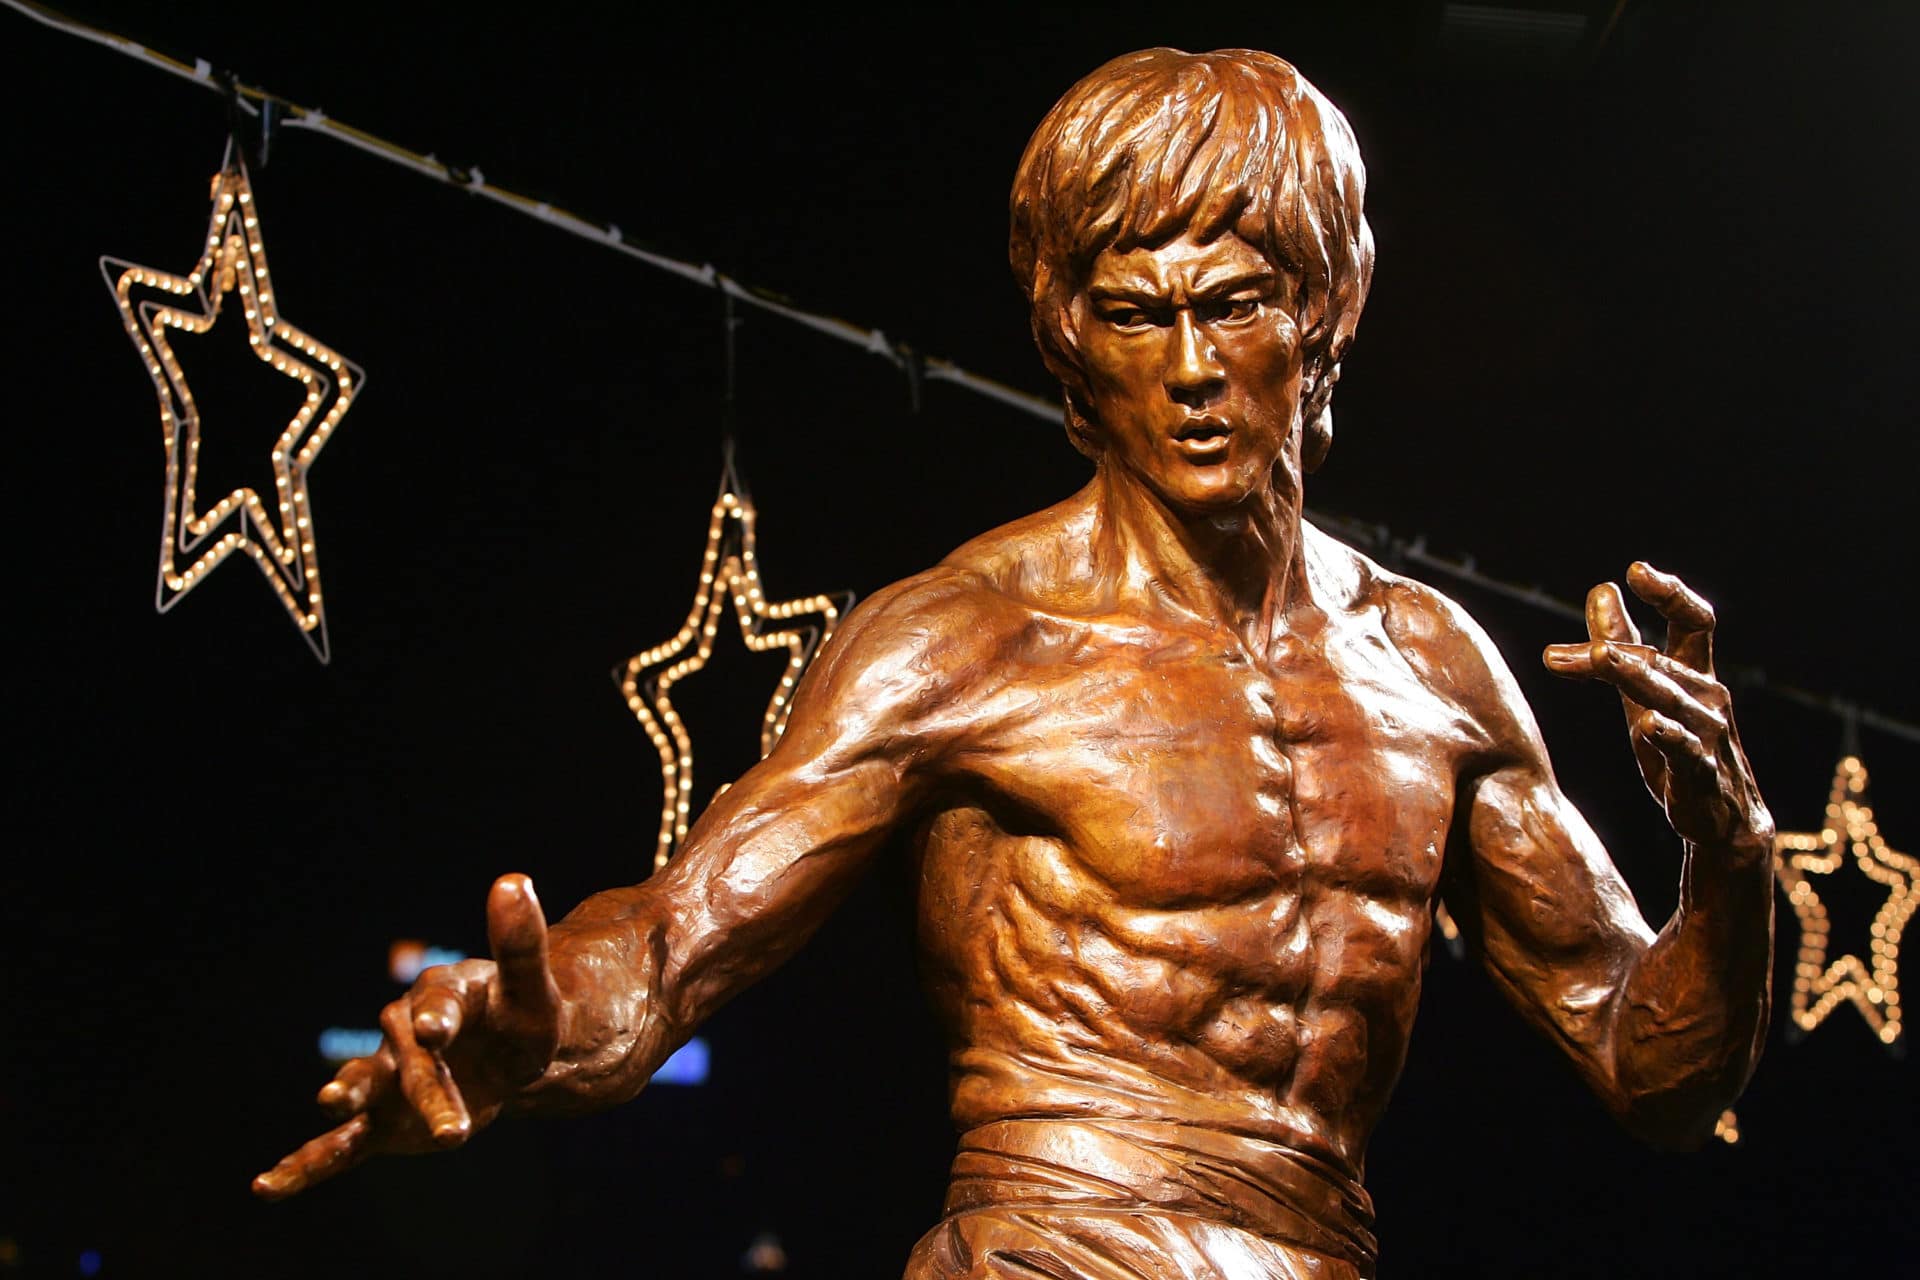 On Bruce Lee's death anniversary, a celebration of life | The Book Of Man